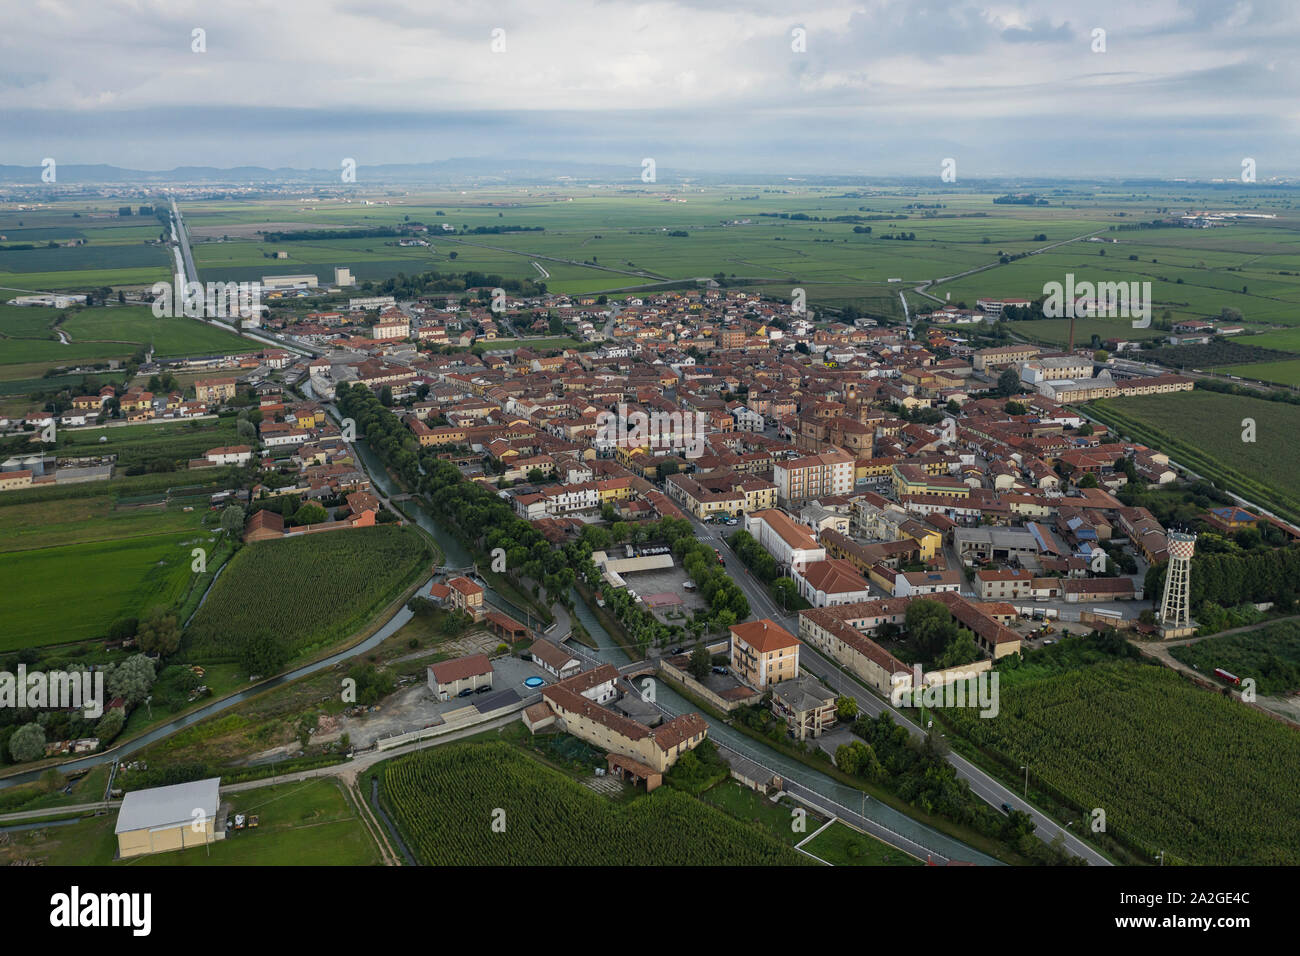 Aerial view of San Germano Vercellese in Piedmont, Italy Stock Photo